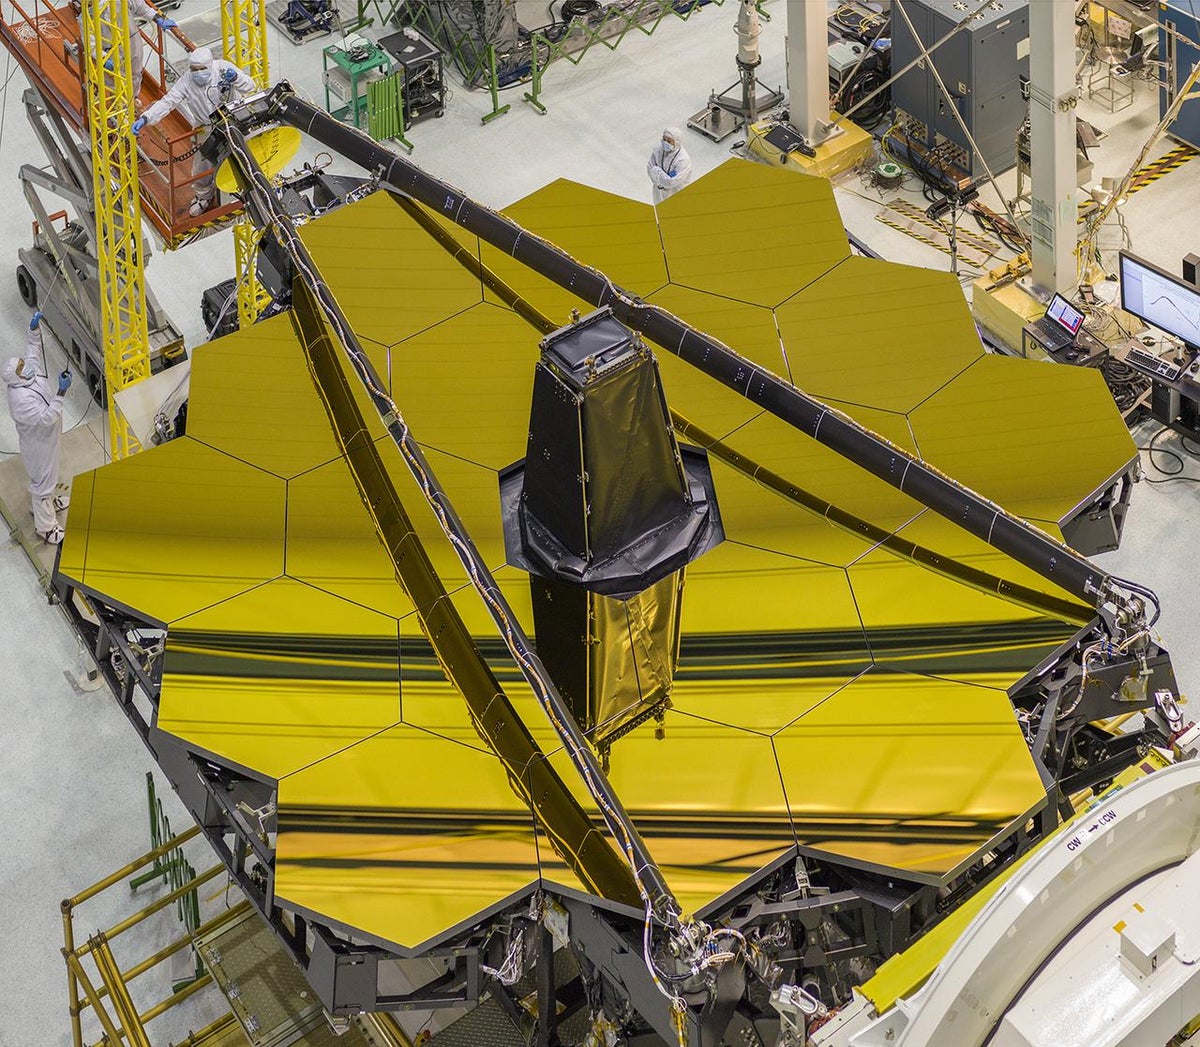 Nasa James Webb Space Telescope: Why astronomers are so excited, and everything else about new images